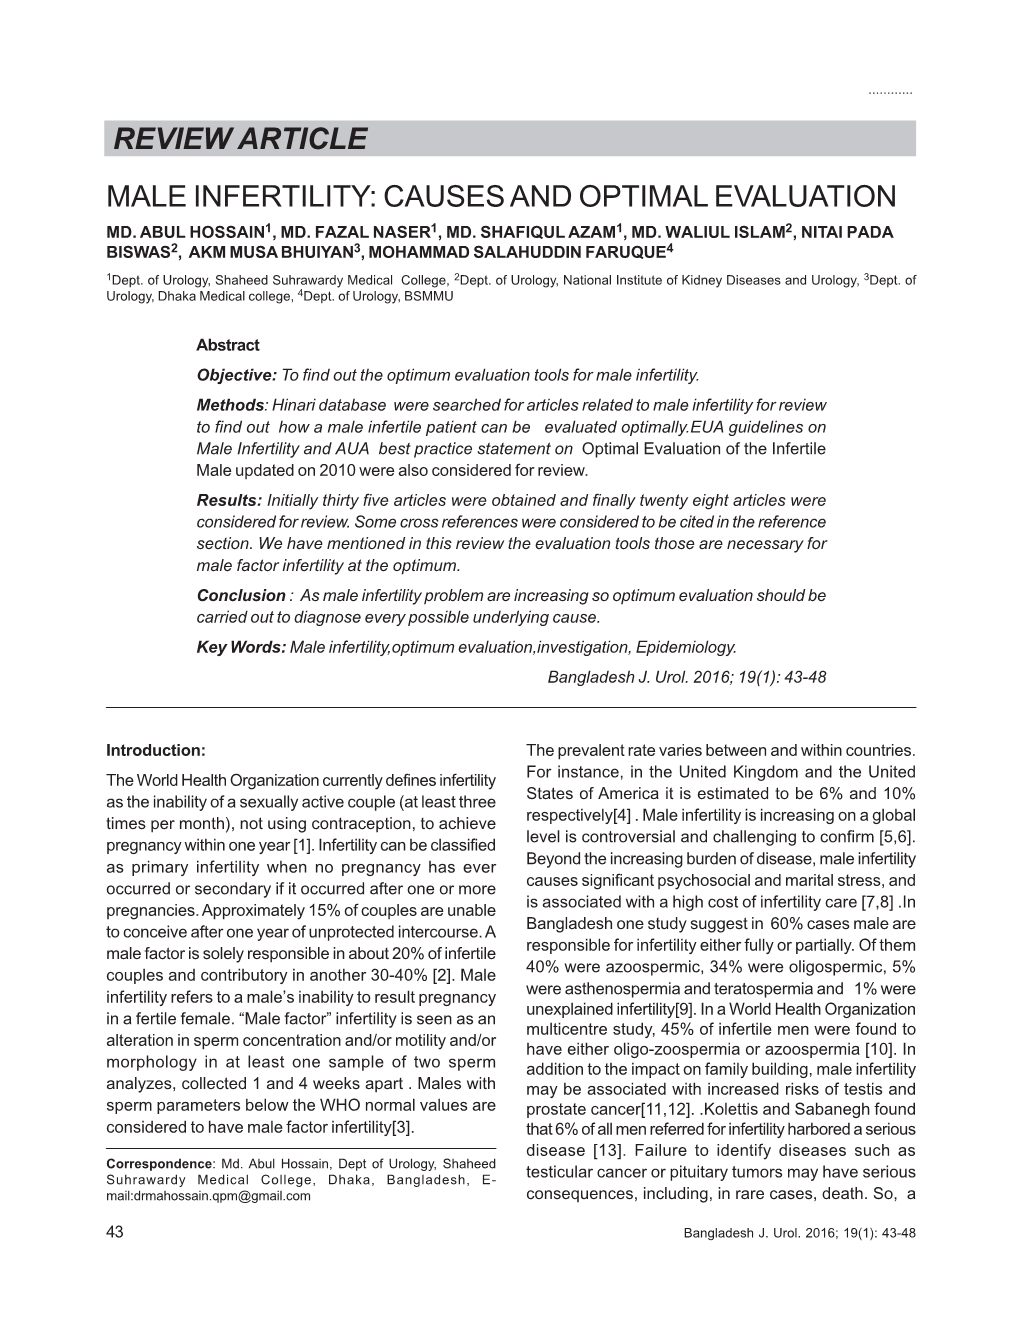 Review Article Male Infertility: Causes and Optimal Evaluation Md